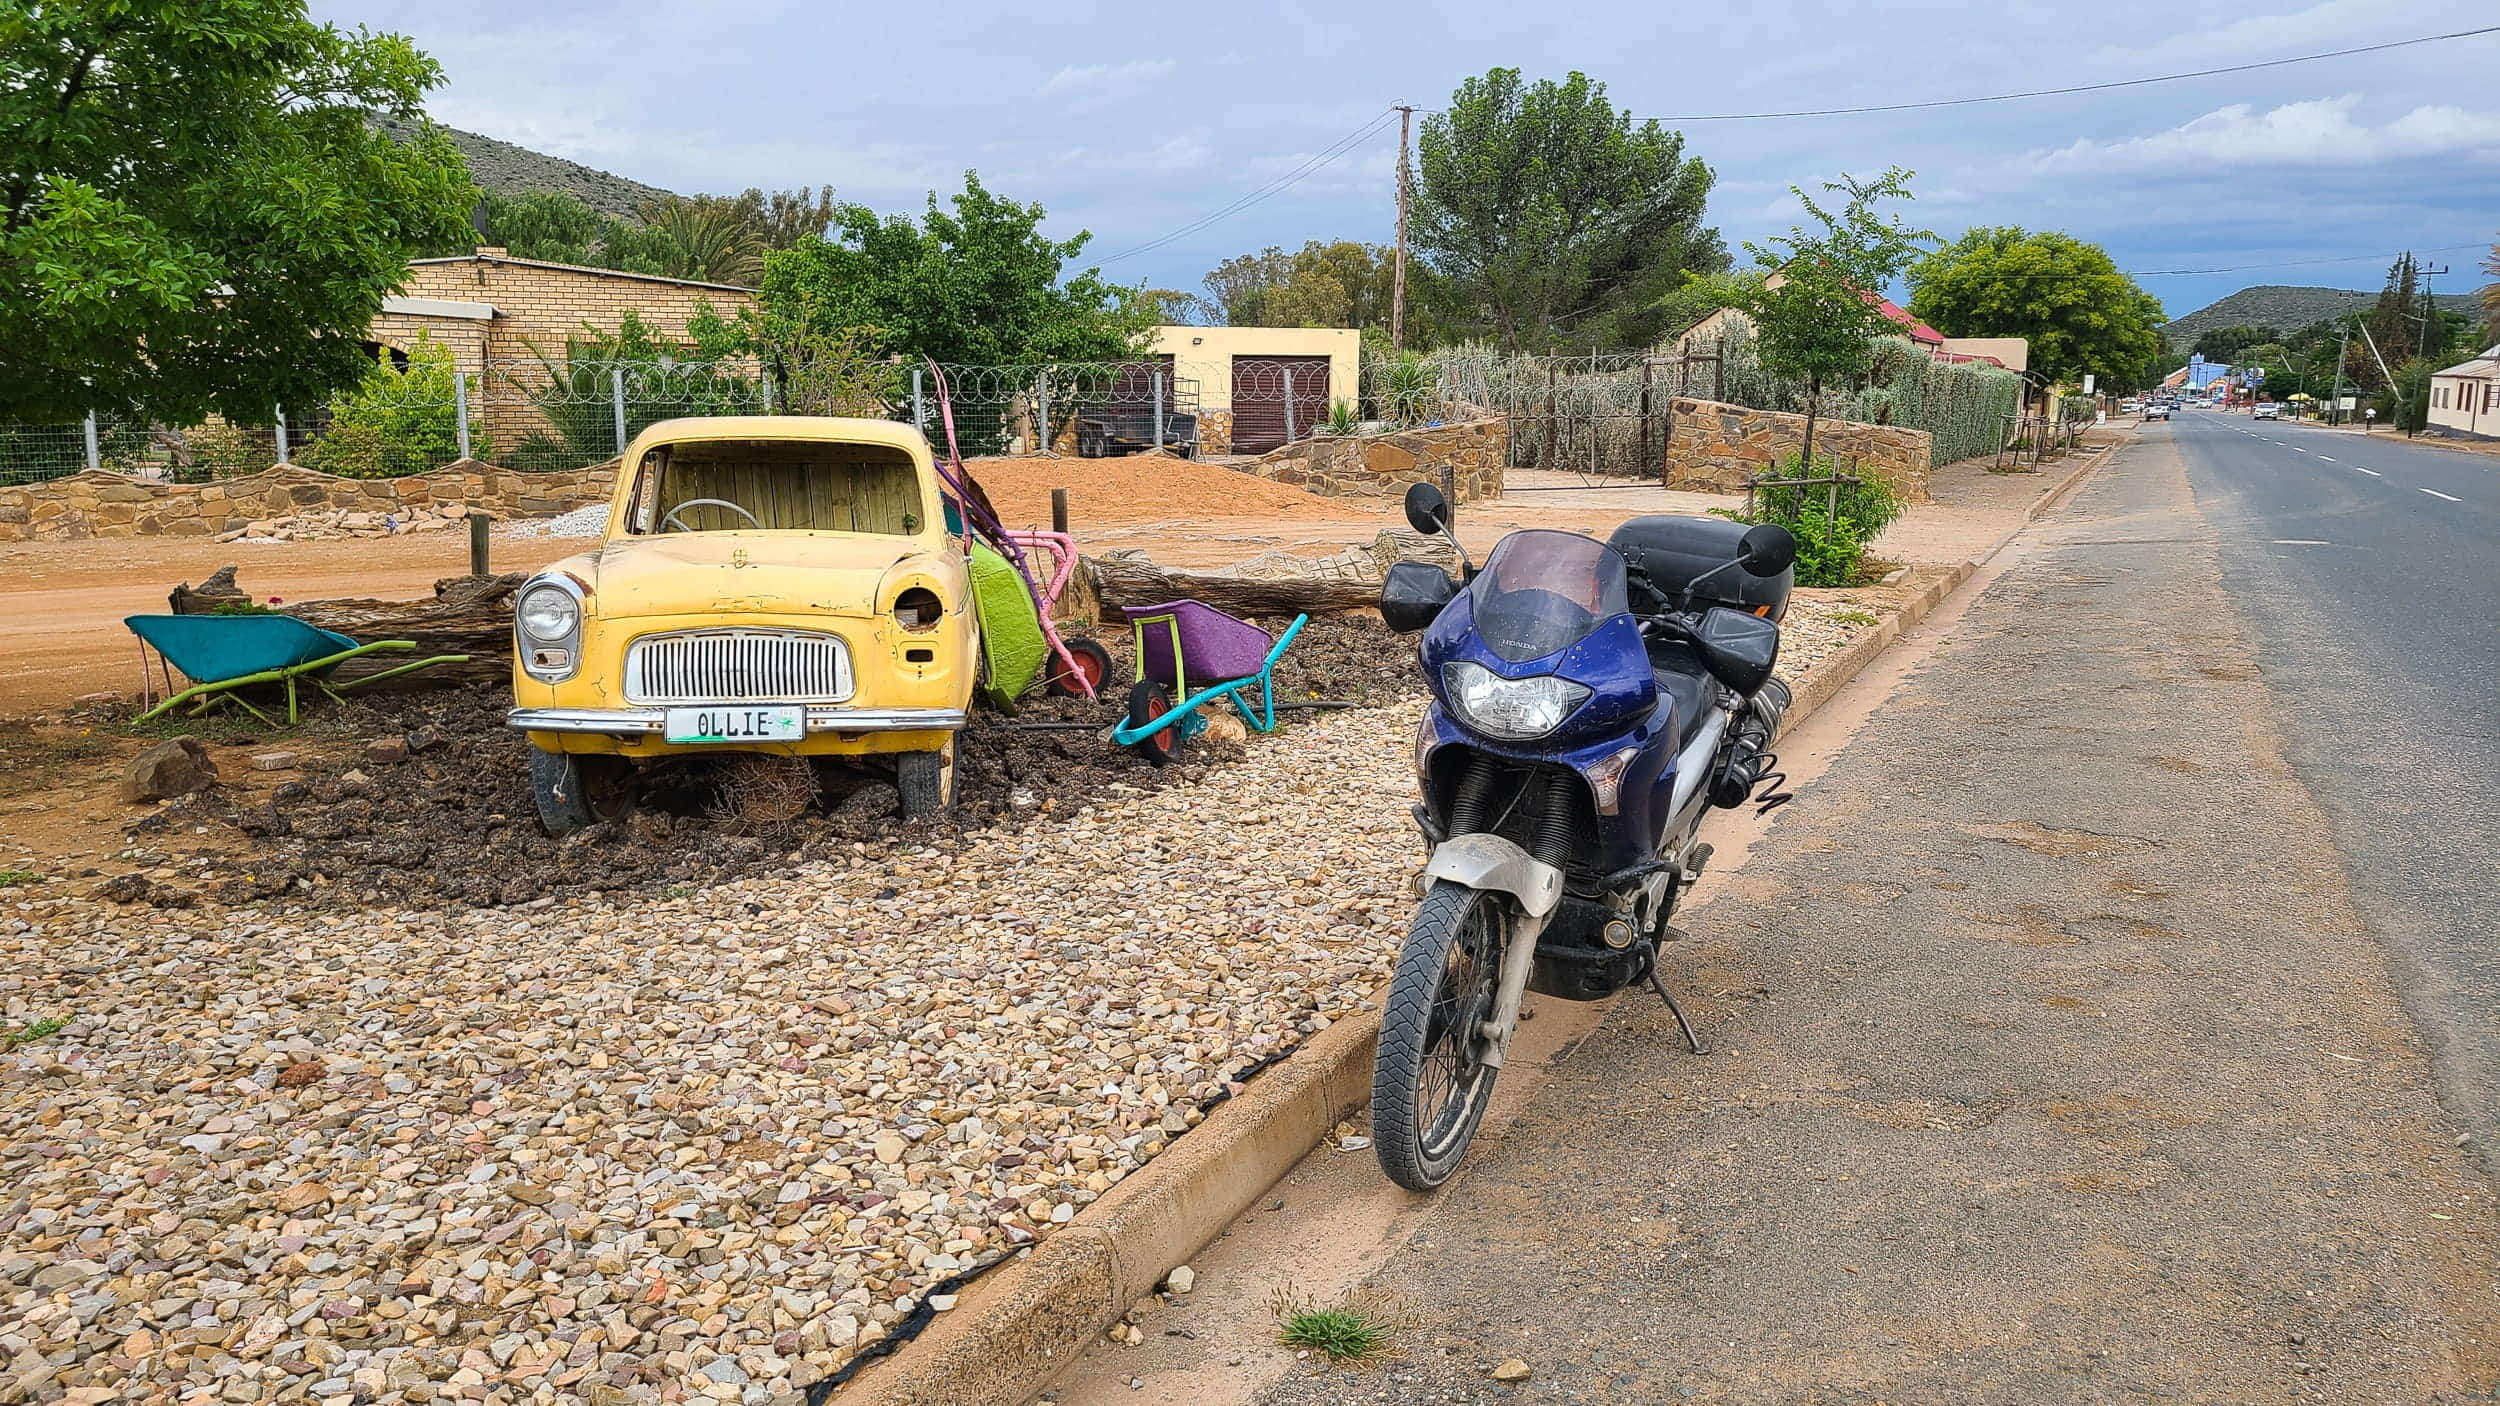 motorcycle parked next to an old car turned into garden